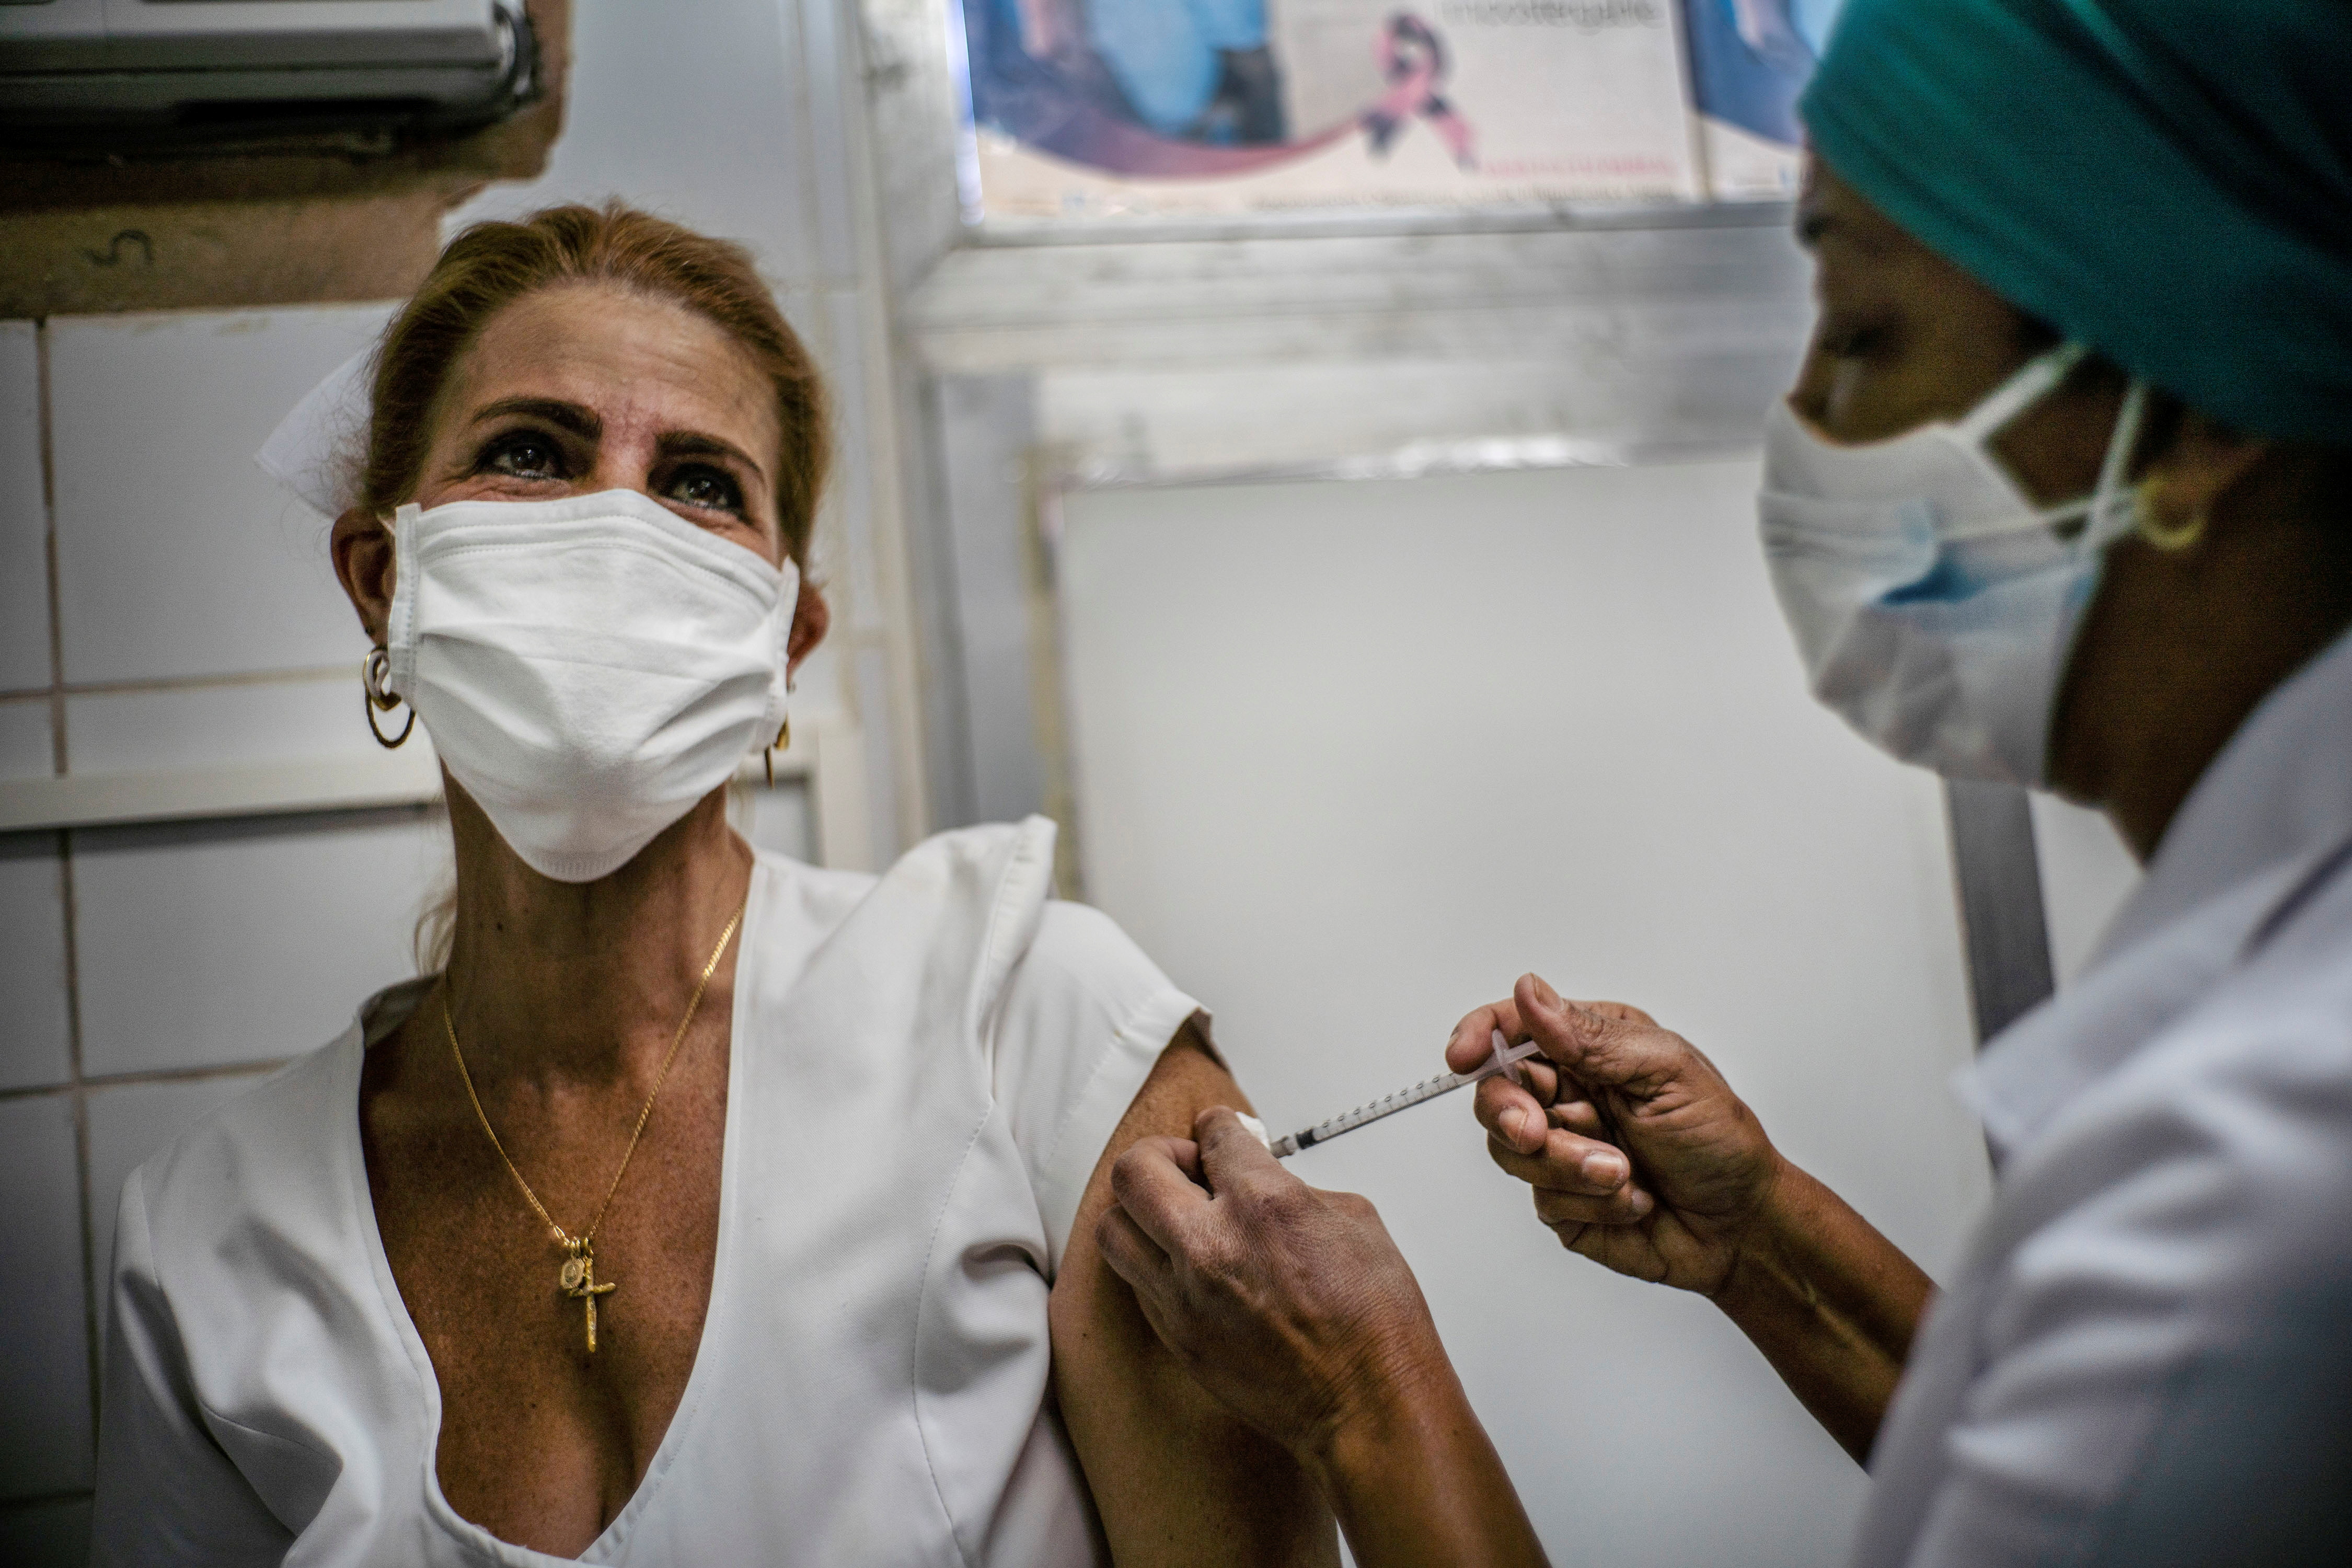 A nurse applies a dose of the Soberana-02 COVID-19 vaccine to a health worker, as part of Phase III trials of the experimental Cuban vaccine candidate amid concerns about the spread of the coronavirus disease, in Havana, Cuba, March 24, 2021. Ramon Espinosa / Pool via REUTERS